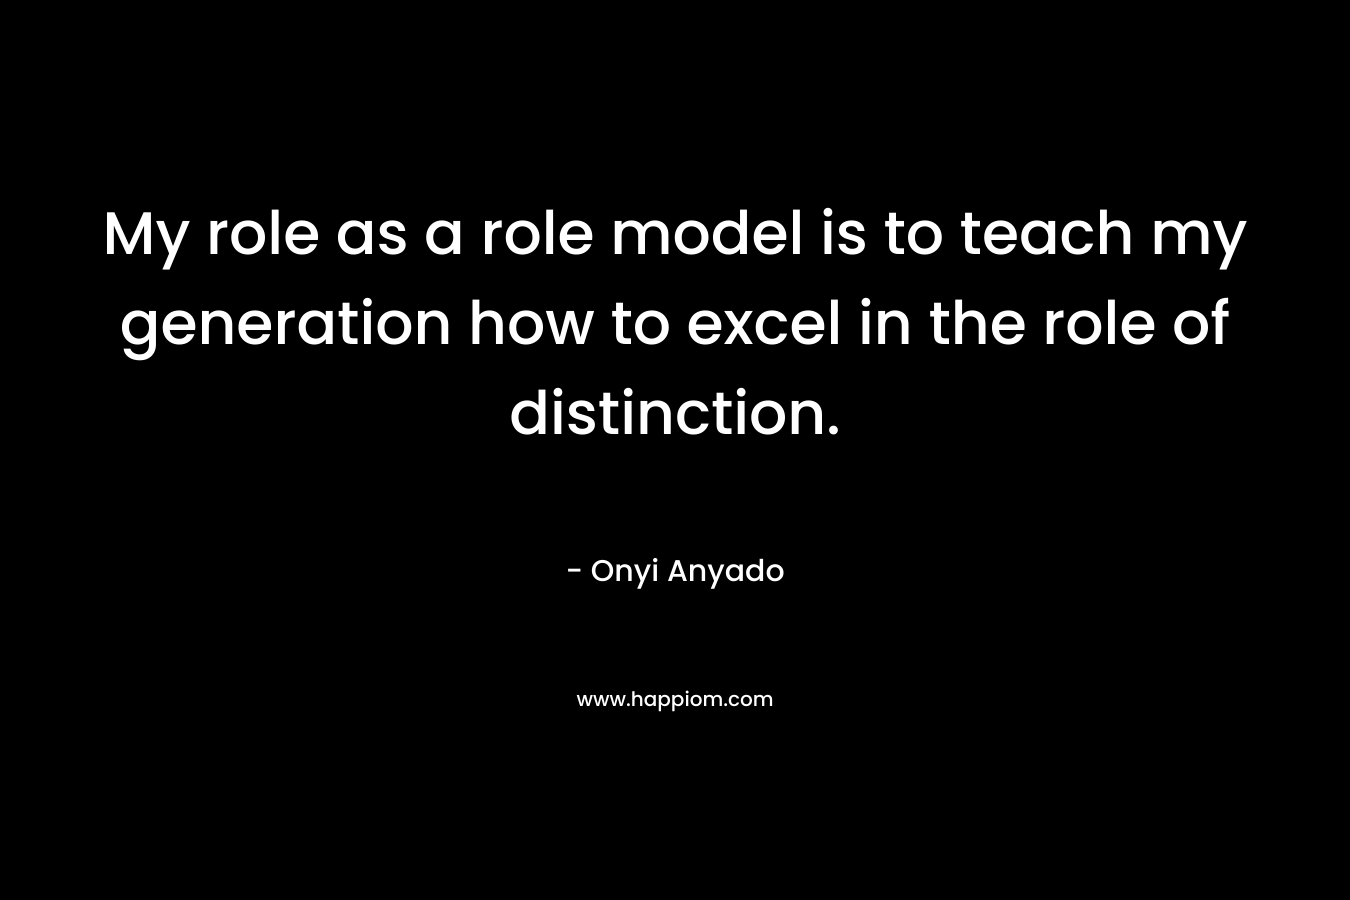 My role as a role model is to teach my generation how to excel in the role of distinction.